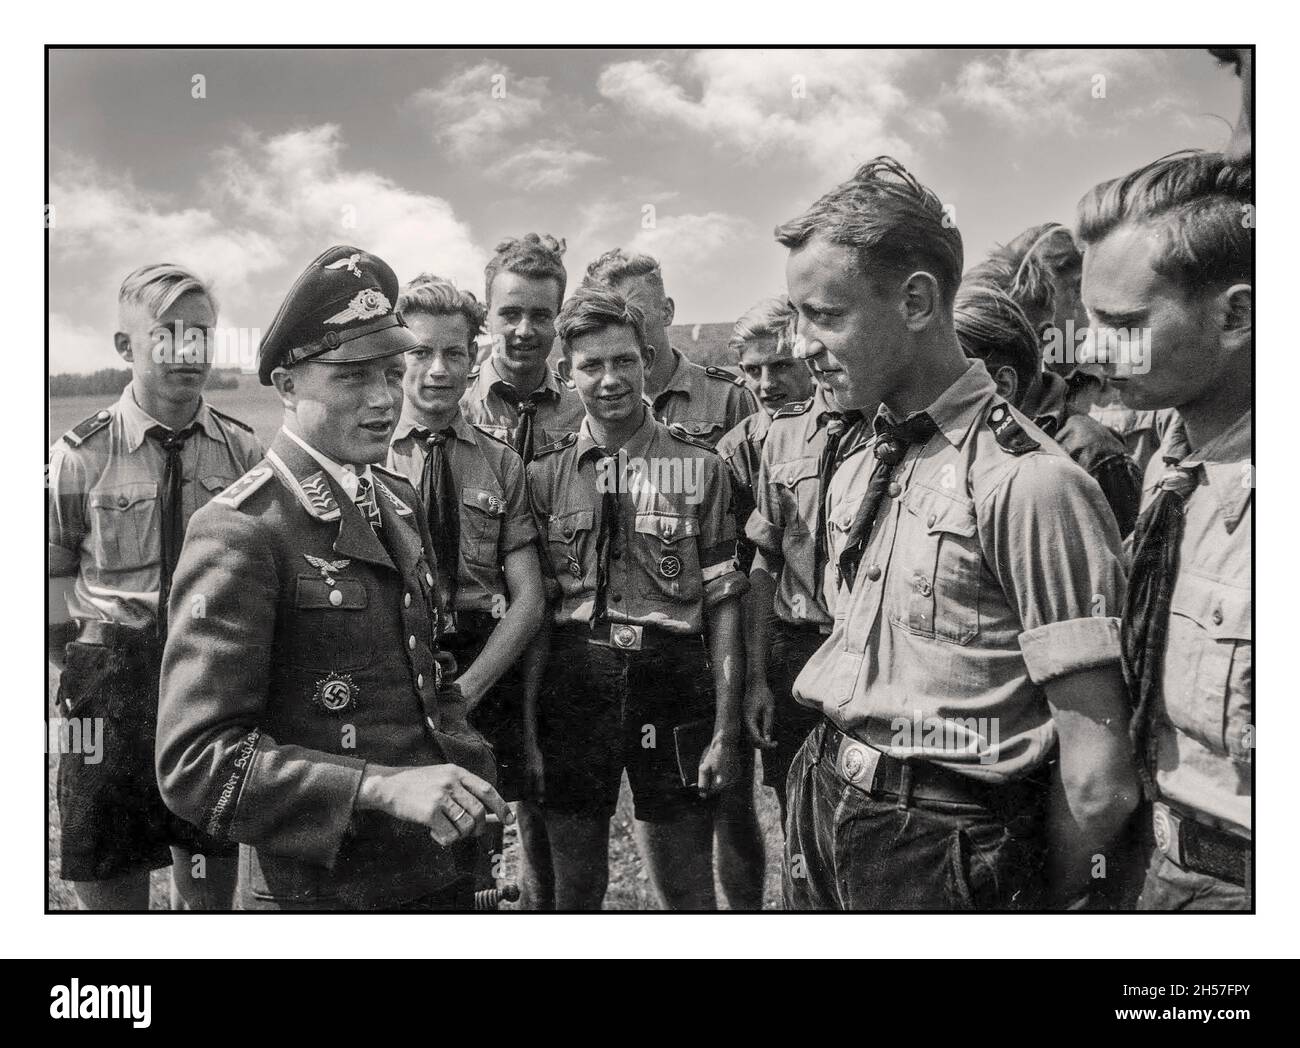 Nazi Propaganda Image 1940s Ritterkreuzträger (Knight's Cross recipient) Oberfeldwebel Wilhelm 'Willi' Freuwörth from Jagdgeschwader 52 (JG 52) shares his experiences with the Hitler Youth from the air section of the Hitlerjugend in Rossitten, East Prussia, 16 July 1944 He received the Ritterkreuz des Eisernen Kreuzes on 5 January 1943 as Feldwebel and Flugzeugführer in 2.Staffel / I.Gruppe / Jagdgeschwader 52 after 53 air victories (his total is 58). Stock Photo